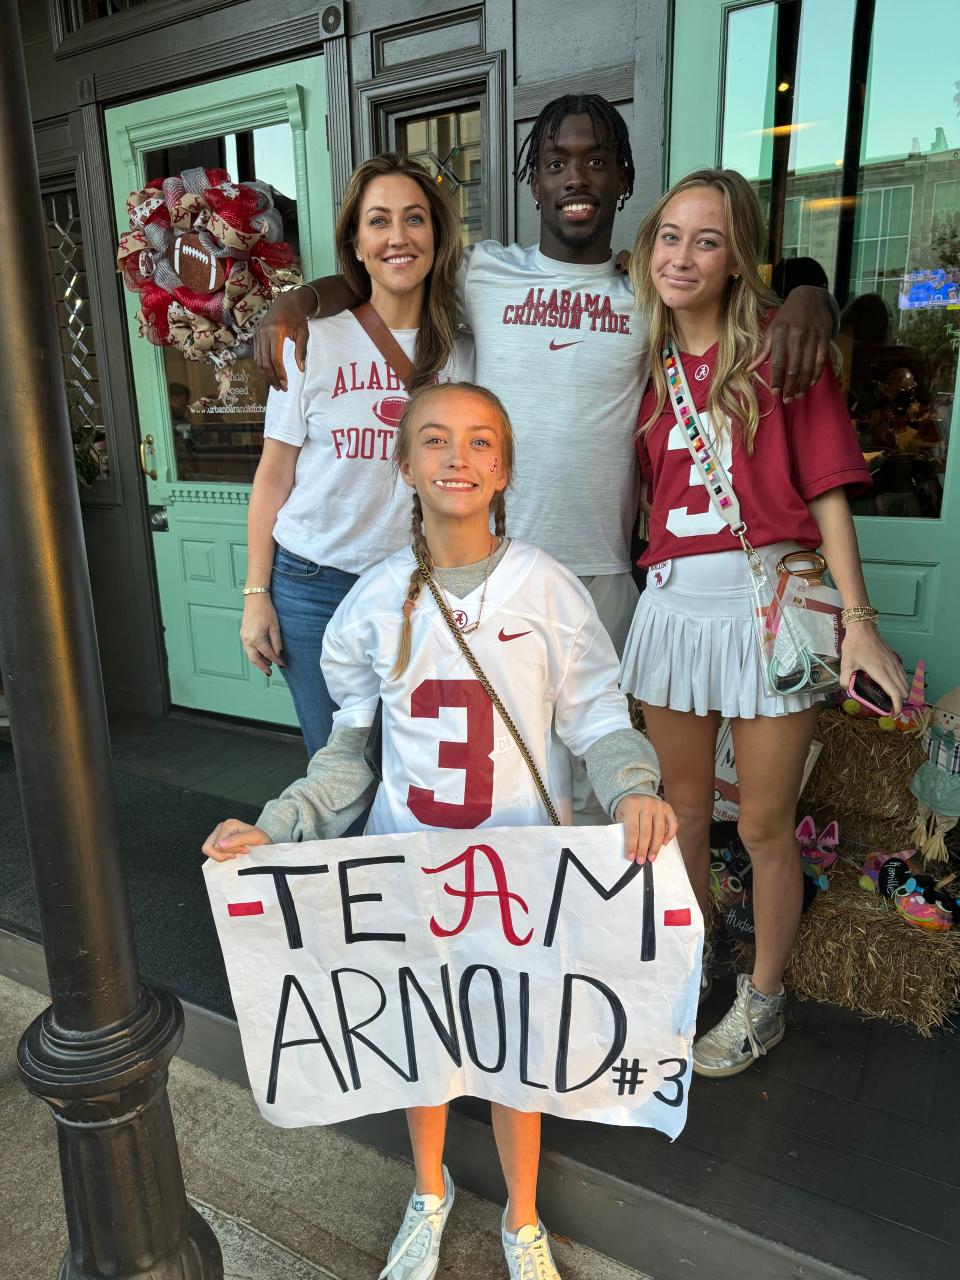 New Detroit Lions cornerback Terrion Arnold poses with Sara Bayliss, left, and her daughters Blair, right, and Blakely, after an Alabama football game.